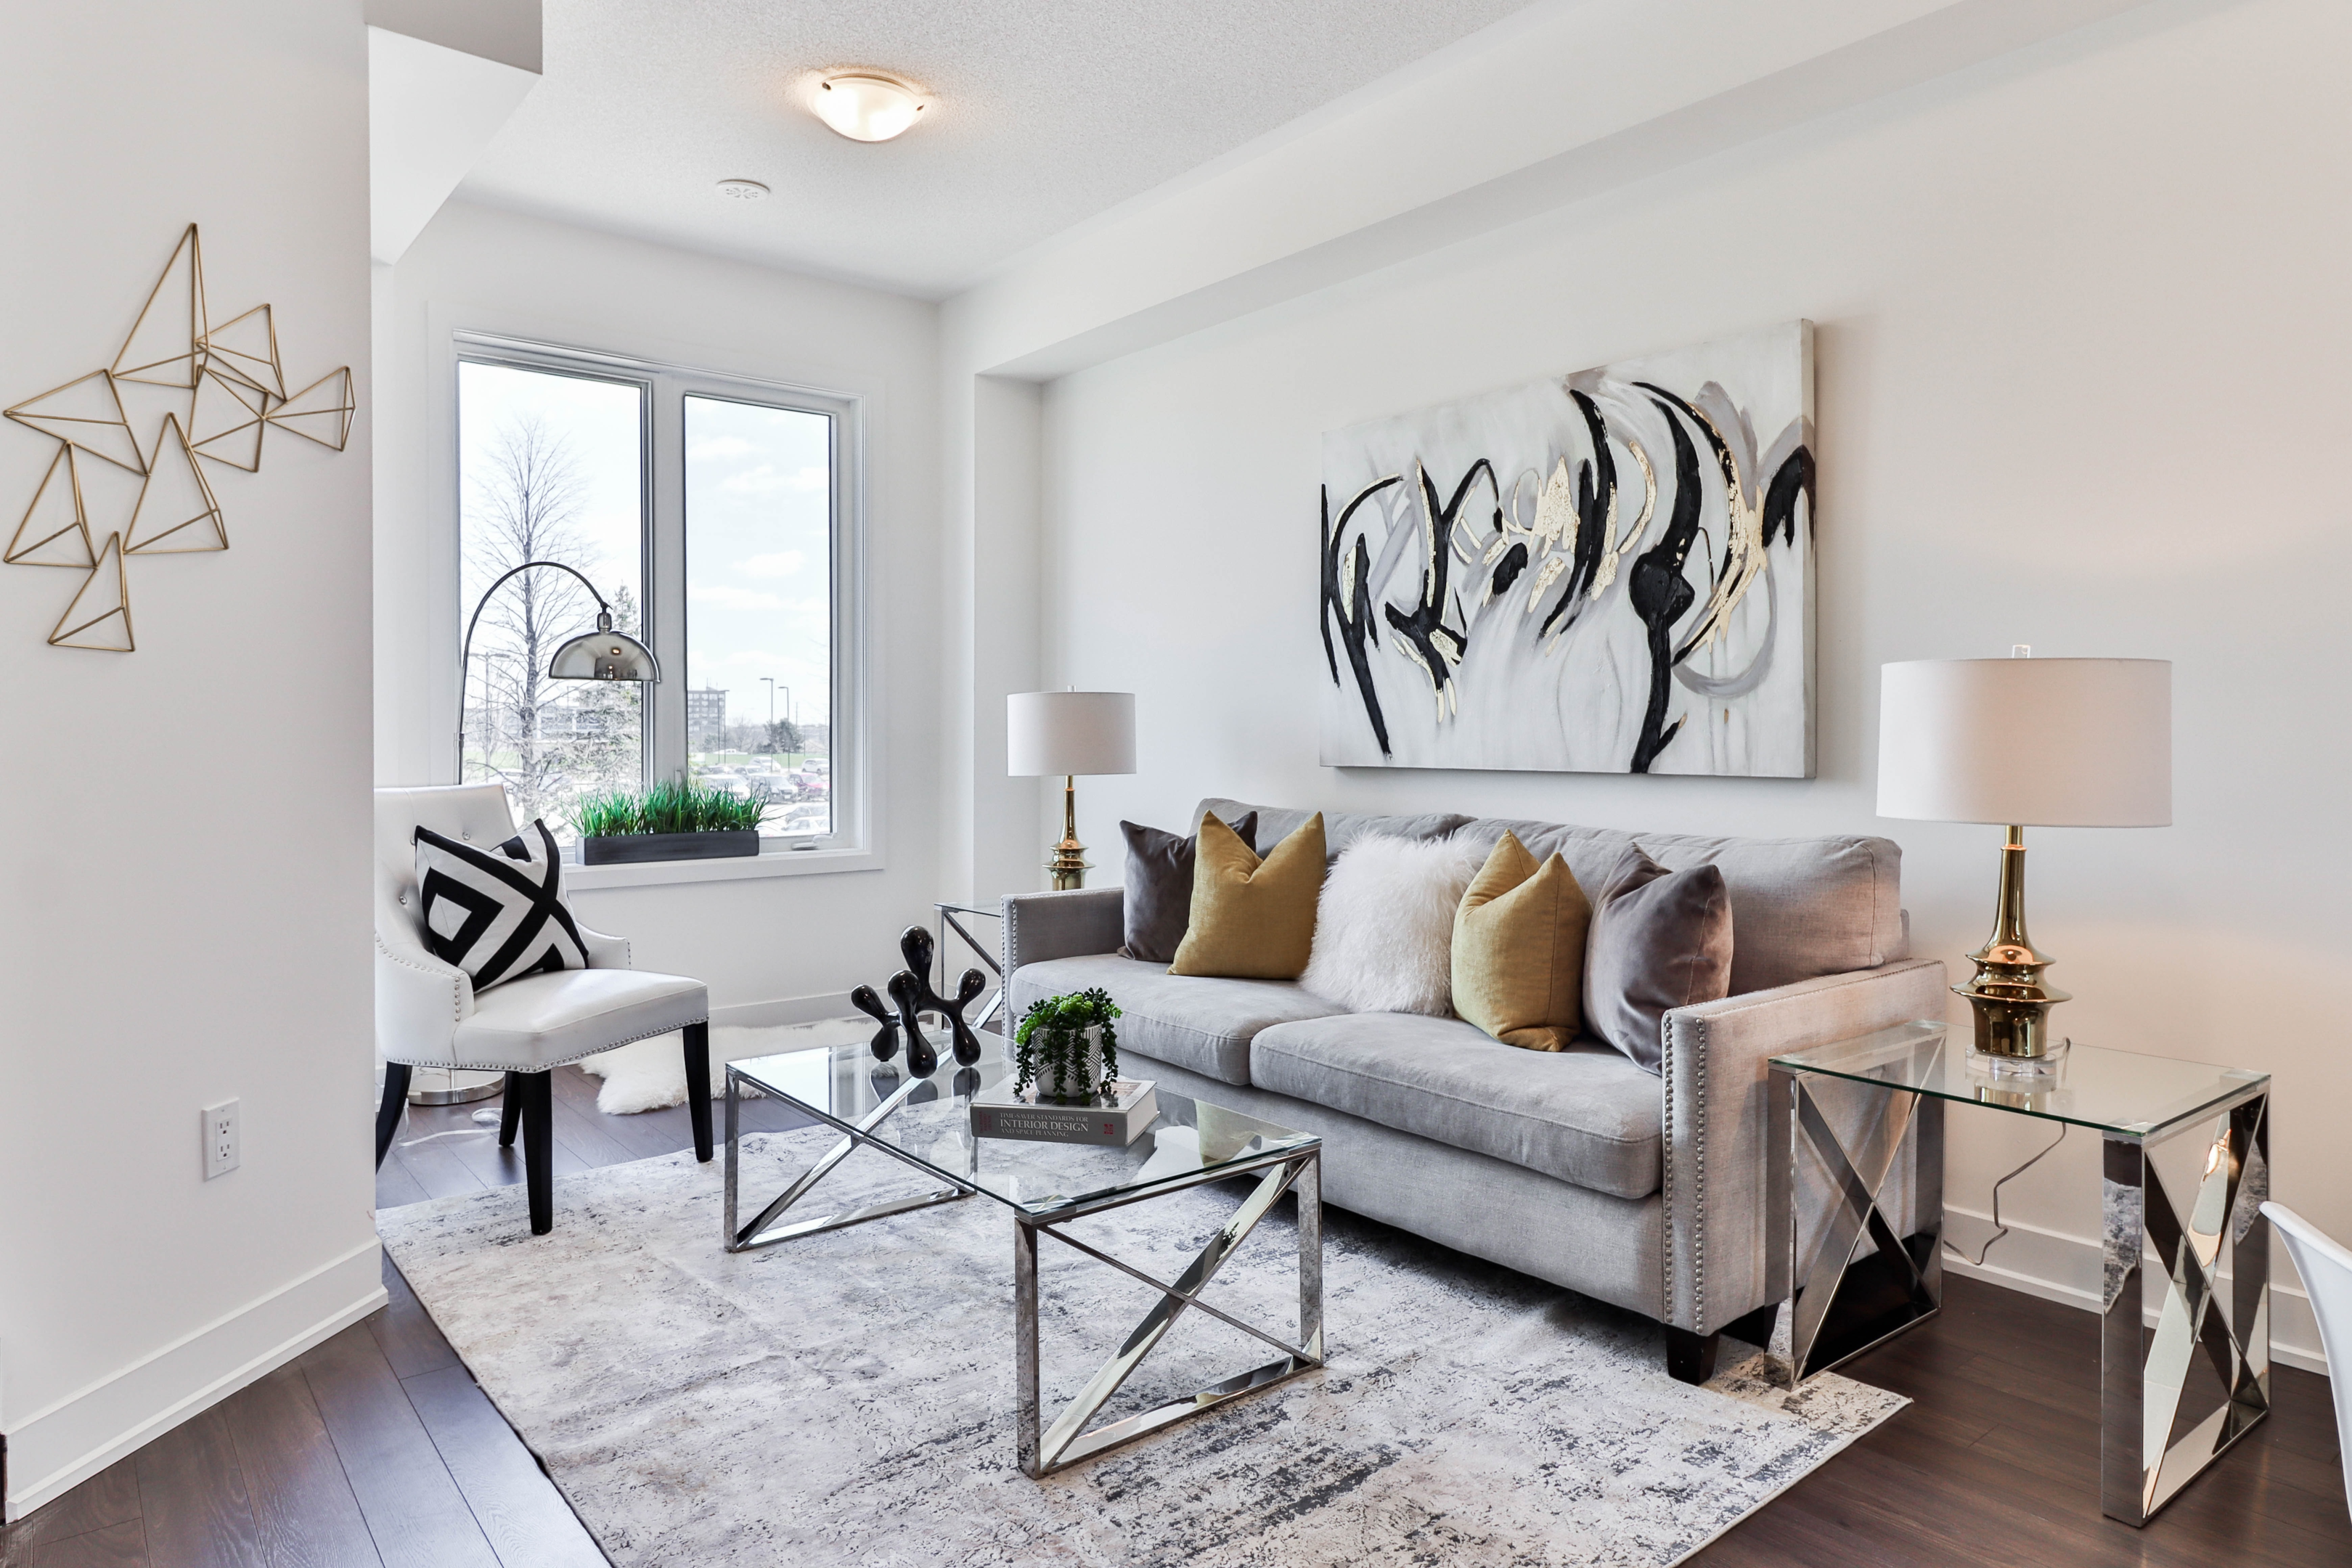 gray gold and white living room with side tables lamps and coffee table - image credit: https://unsplash.com/photos/SnHO-Ua7QtY